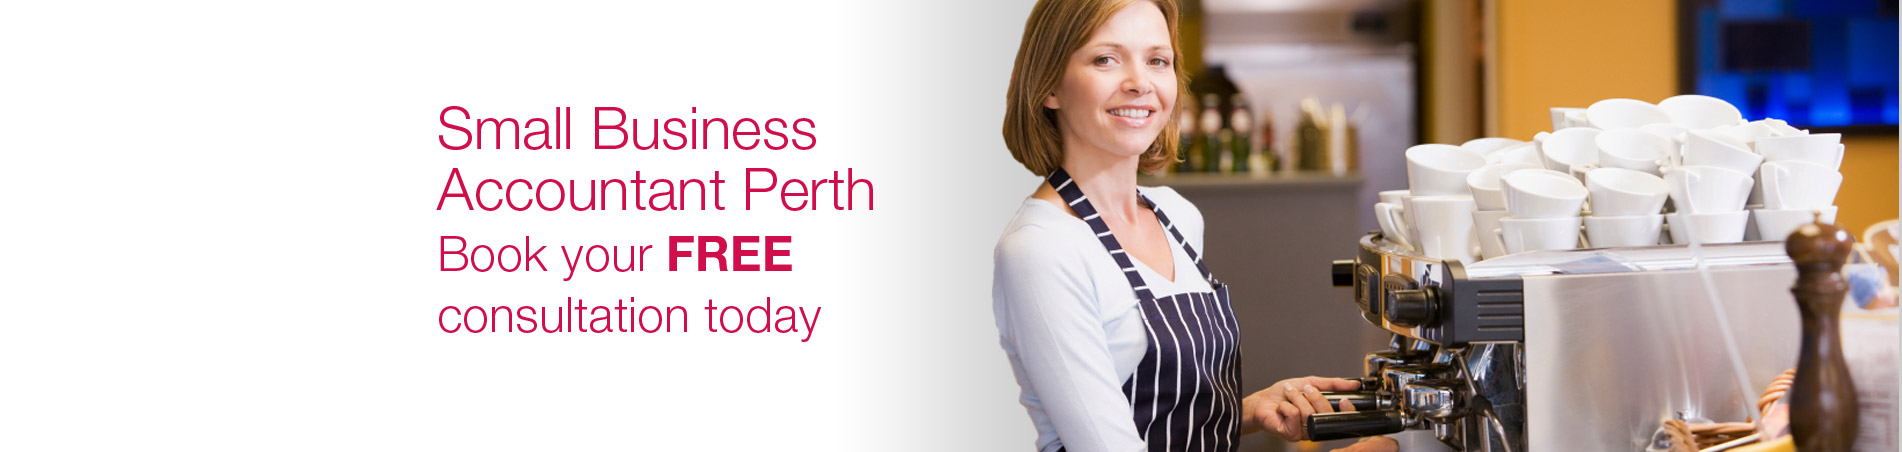 Small-Business-Accountant-Perth1